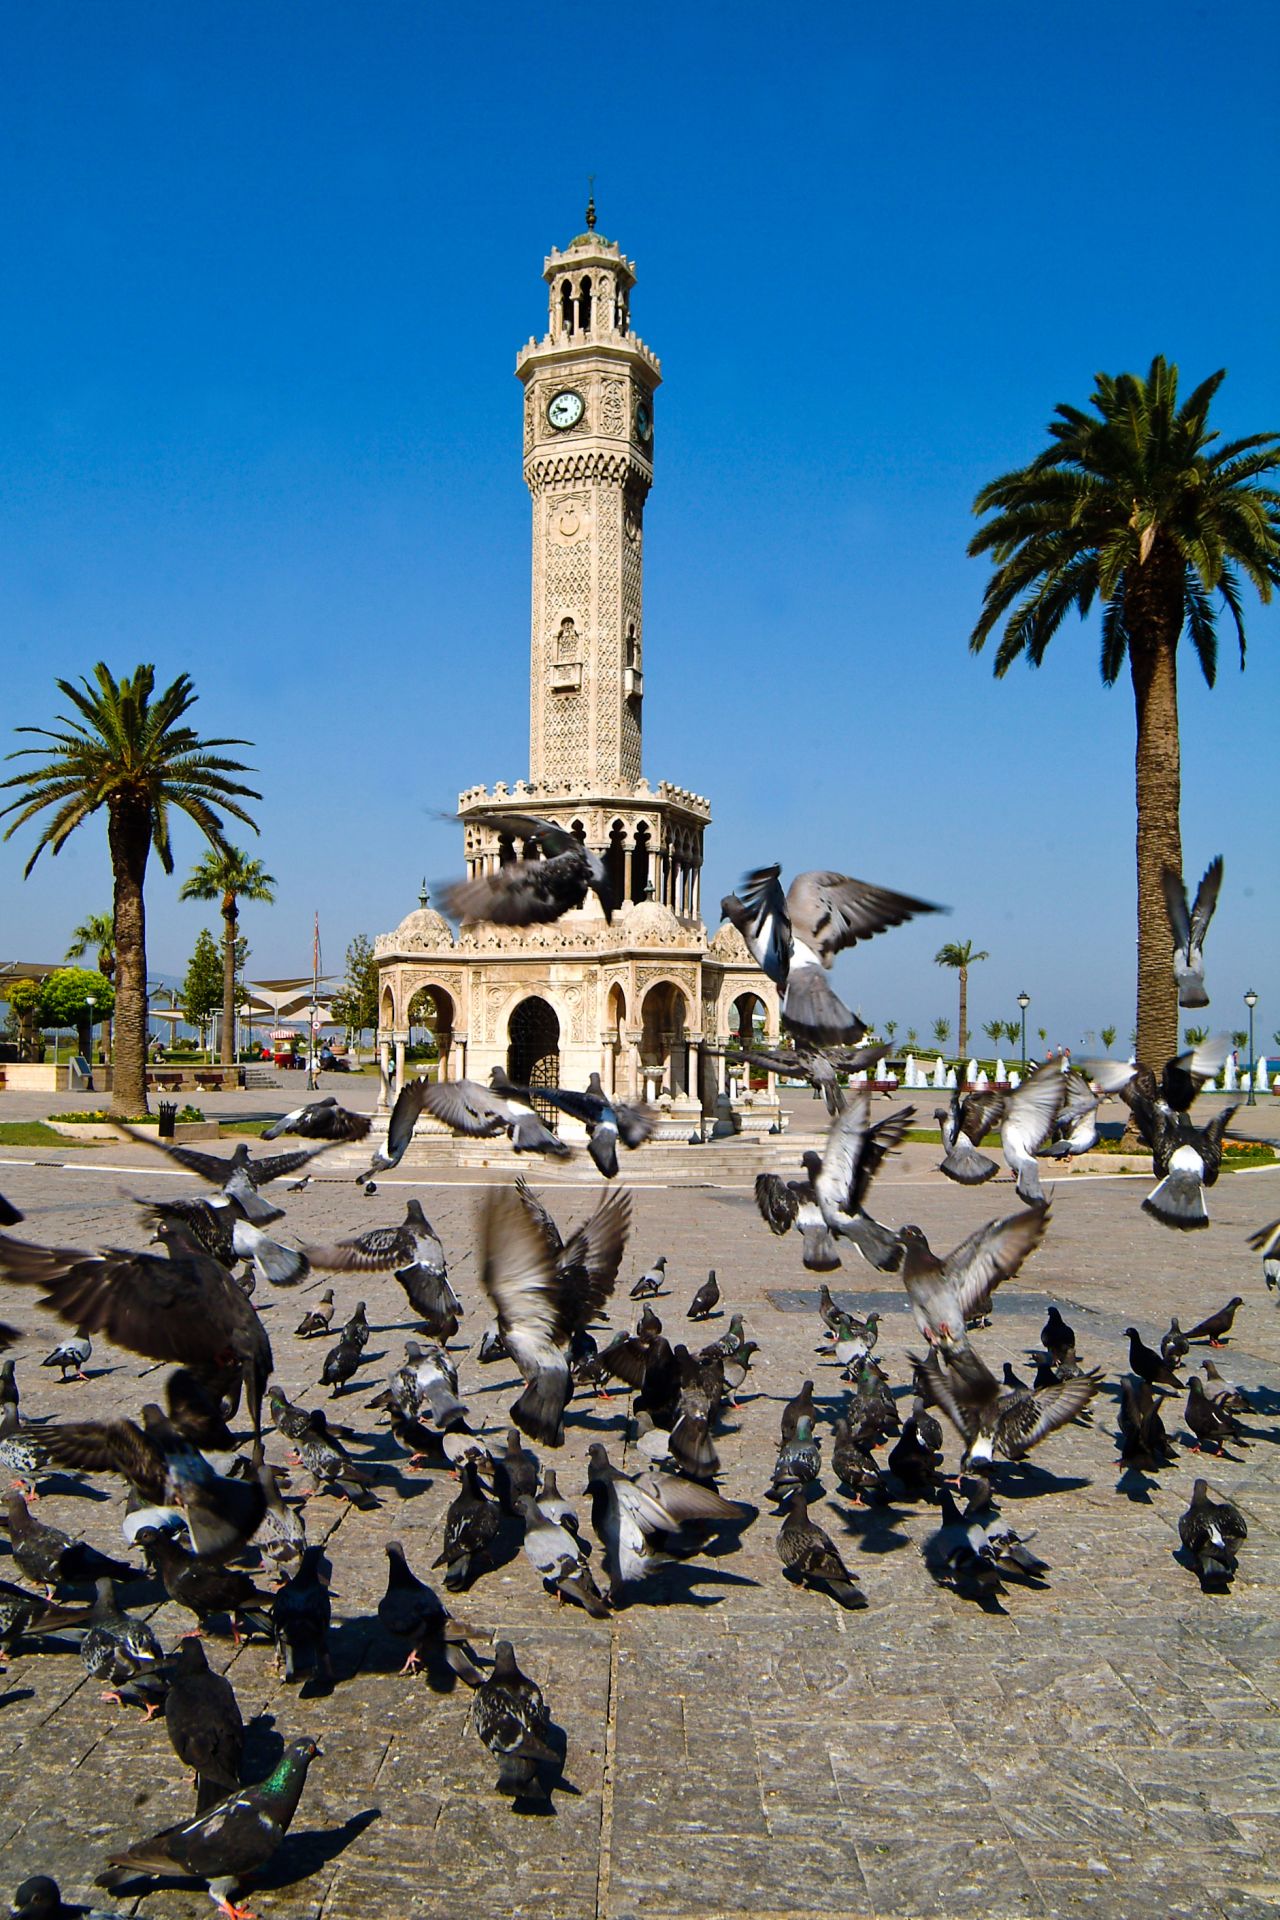 <strong>Izmir Clock Tower, Izmir, Turkey</strong><br /><strong>Completed: </strong>1901<br /><strong>Height: </strong>25 meters (82 feet)<br /><strong>Architect: </strong>Raymond Charles Pere<br /><strong>Special feature</strong><br />There are four small fountains at the base of the tower.<br /><strong>Historic gesture</strong><br />The clock was a present from German emperor Wilhelm II to Sultan Abdulhamit II of the Ottoman Empire as a gesture of friendship.<br /><em>Izmir Clock Tower, Konak Sqaure, Izmir, Turkey</em>